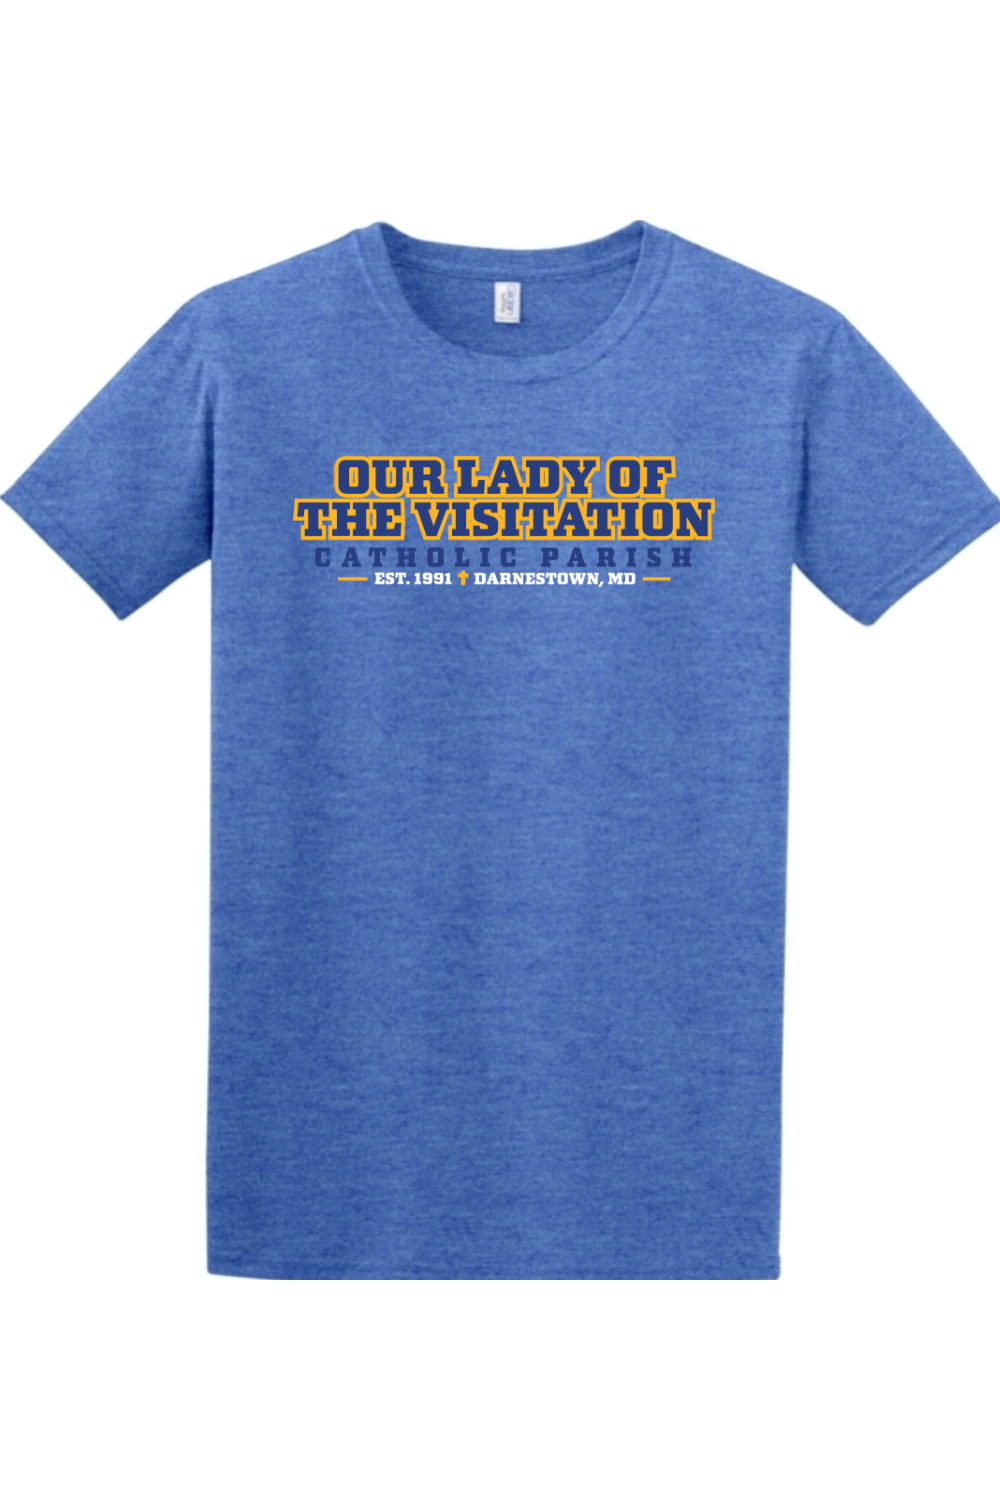 Our Lady of the Visitation Collegiate T-Shirt